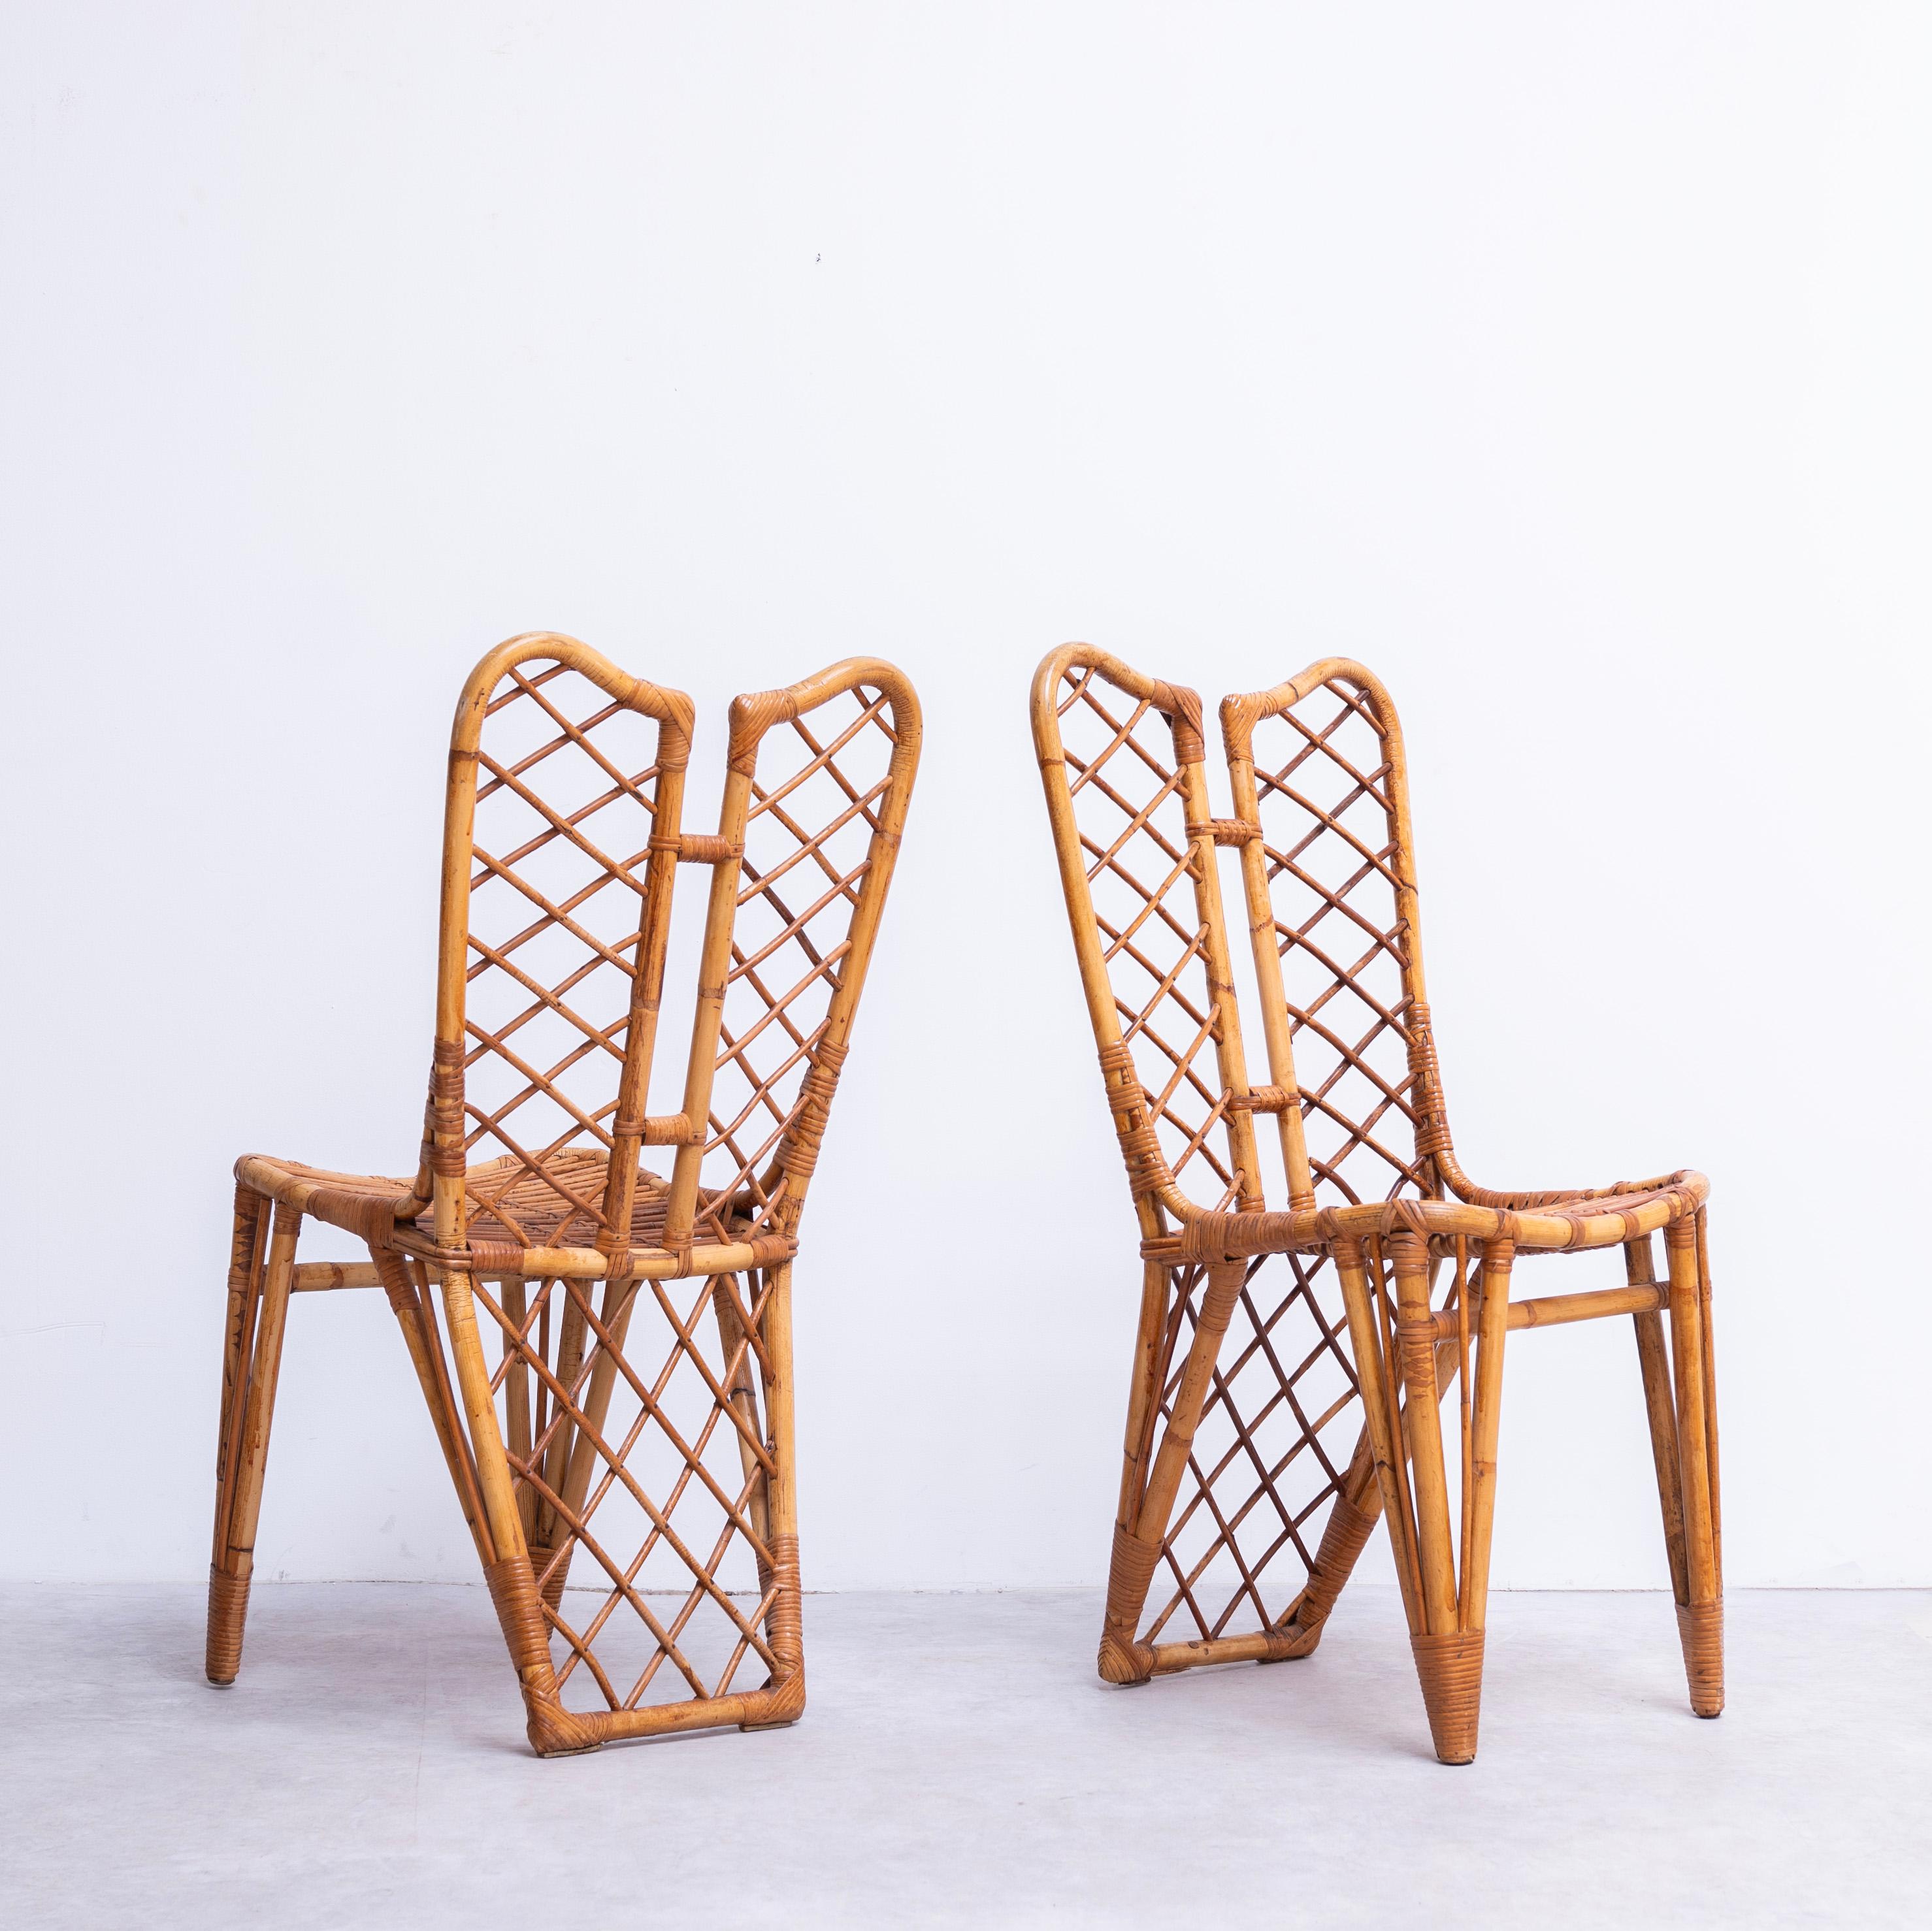 A set of two dining chair in bamboo and rattan.
The eye-catching back to back leg design.
The detailed weaving is also excellent, making these high quality chairs.

The chairs come with the original white fur.